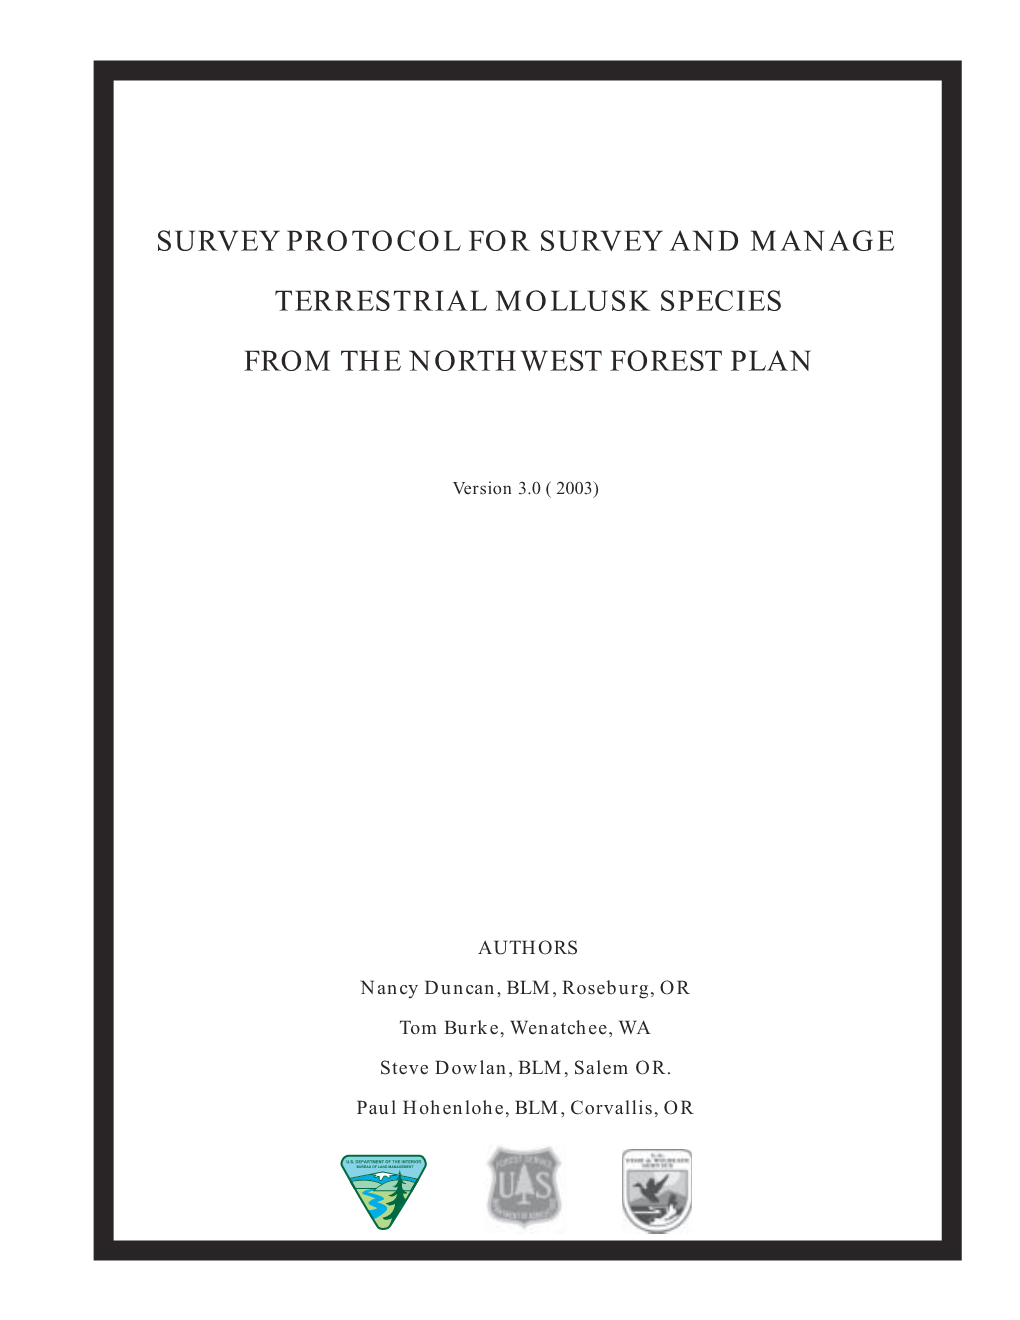 Survey Protocol for Survey and Manage Terrestrial Mollusk Species from the Northwest Forest Plan